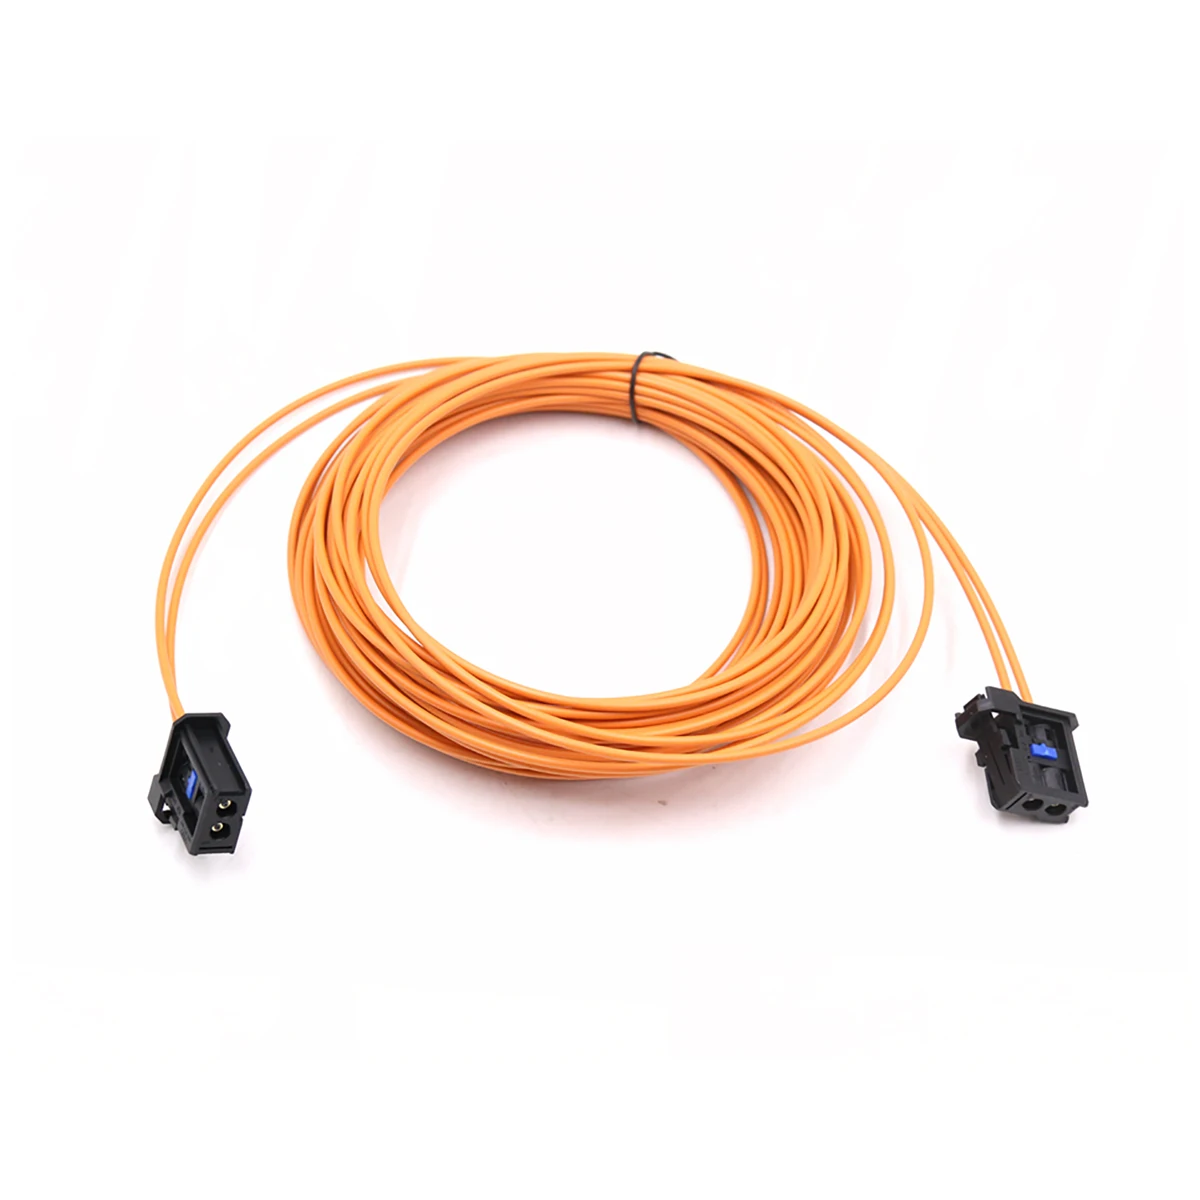 6M MOST Optical fiber Install Wire